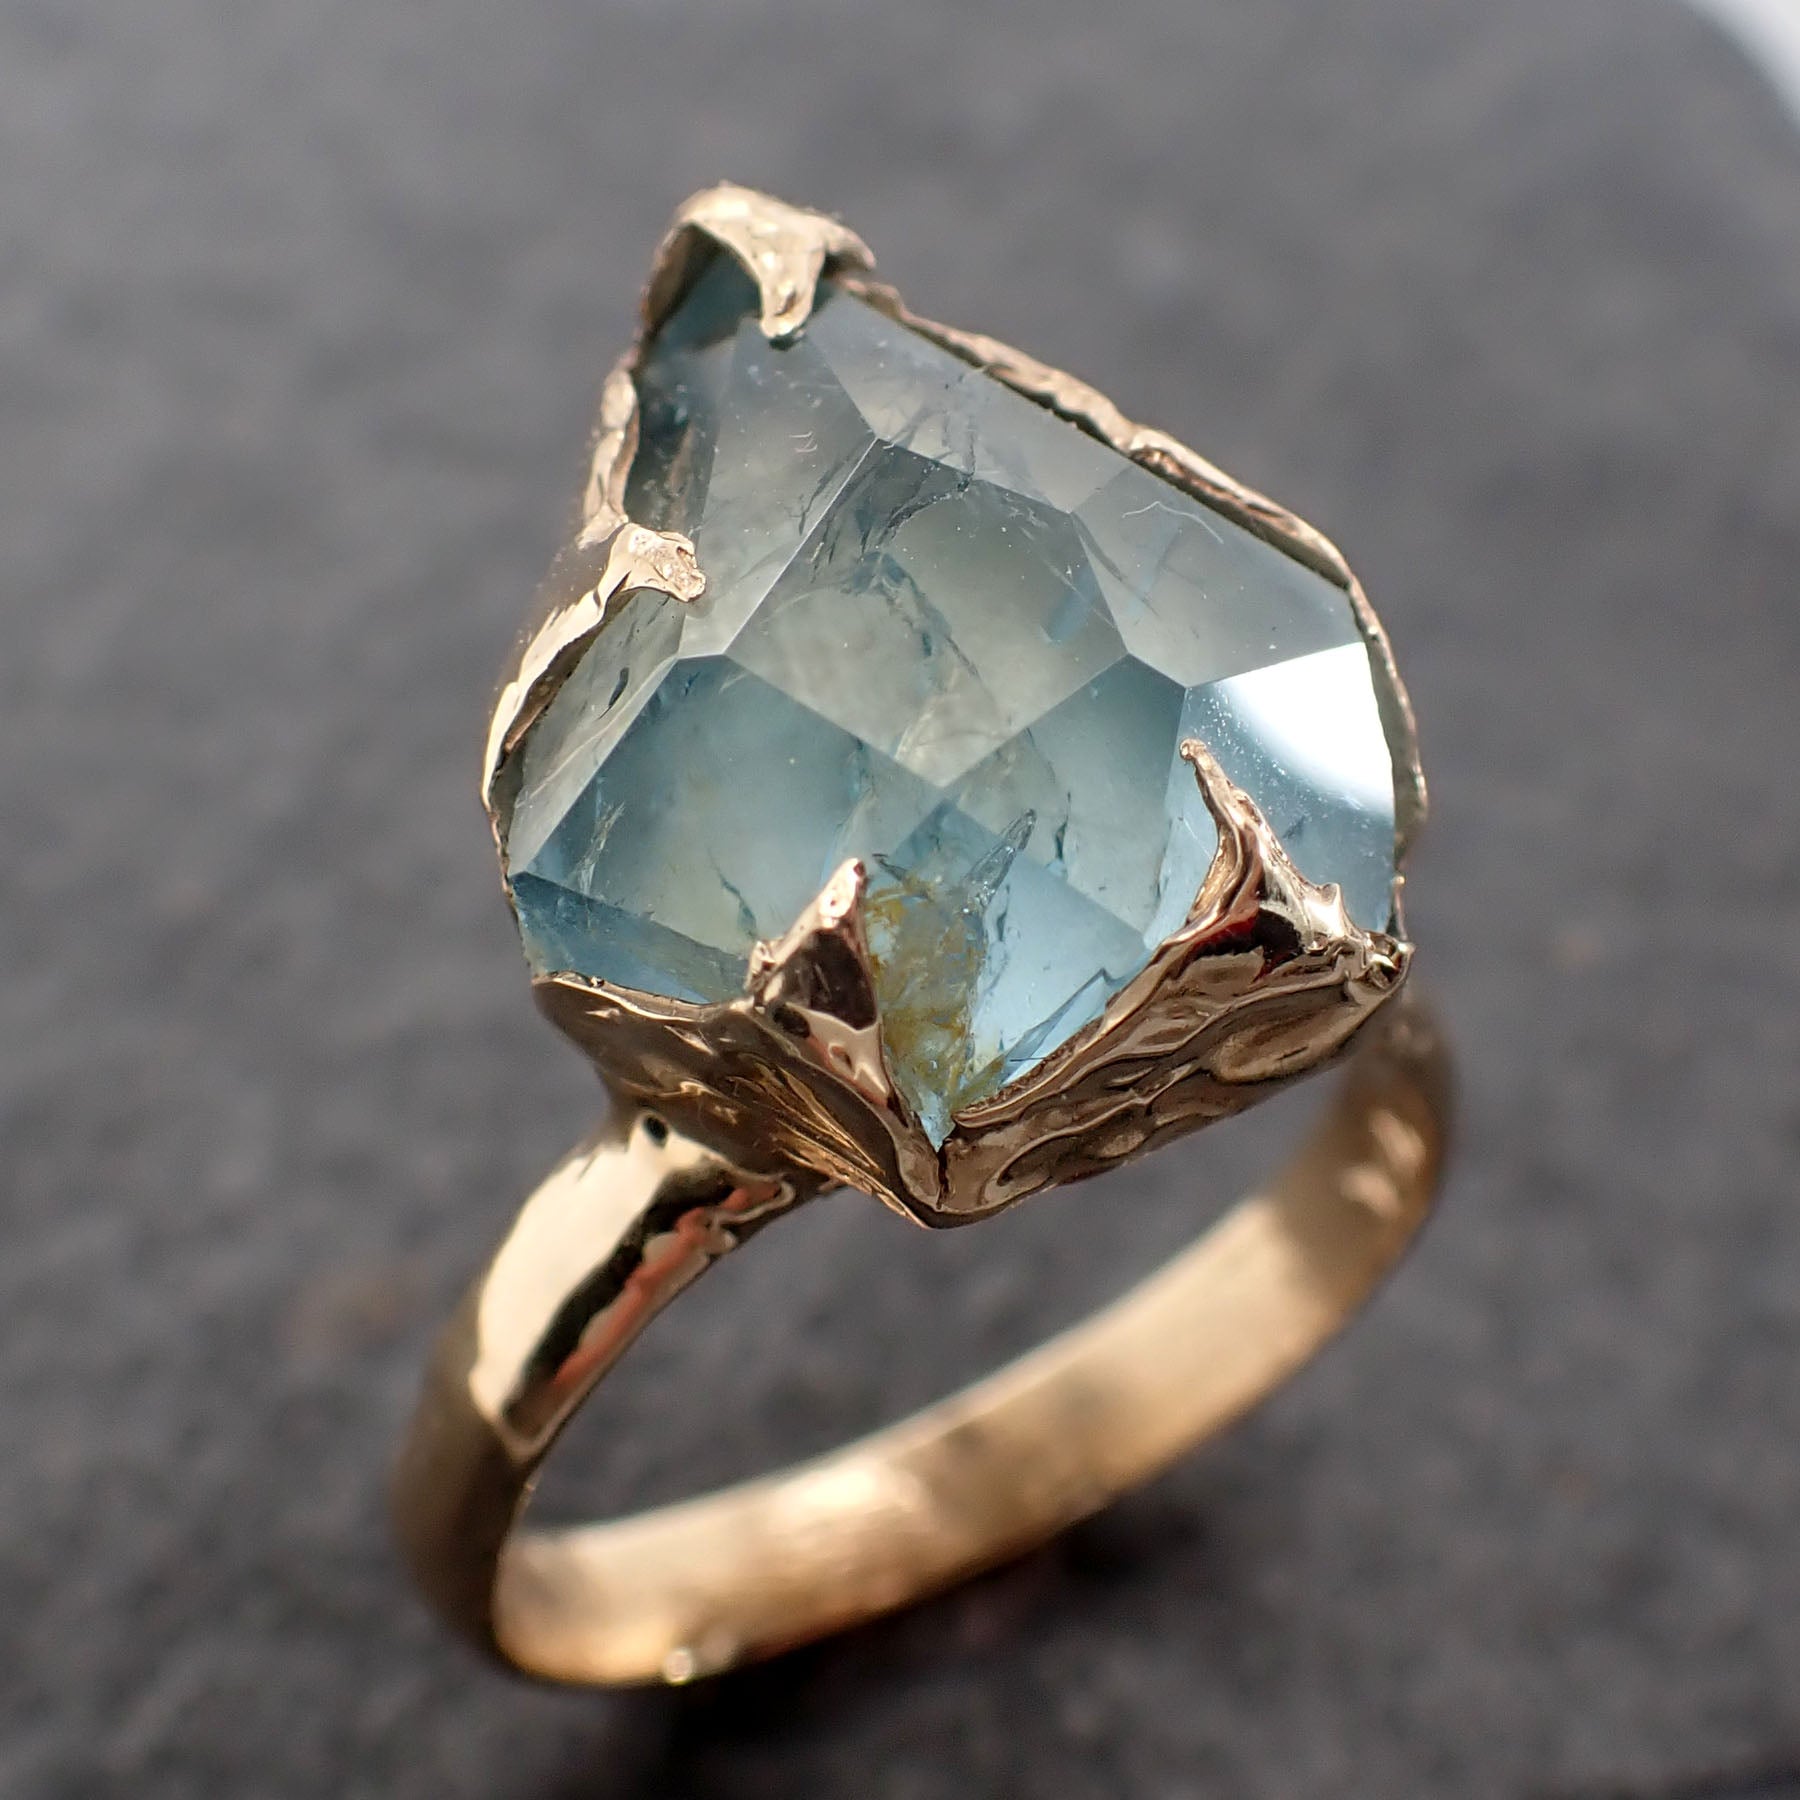 partially faceted aquamarine solitaire ring 14k gold custom one of a kind gemstone ring bespoke byangeline 2530 Alternative Engagement